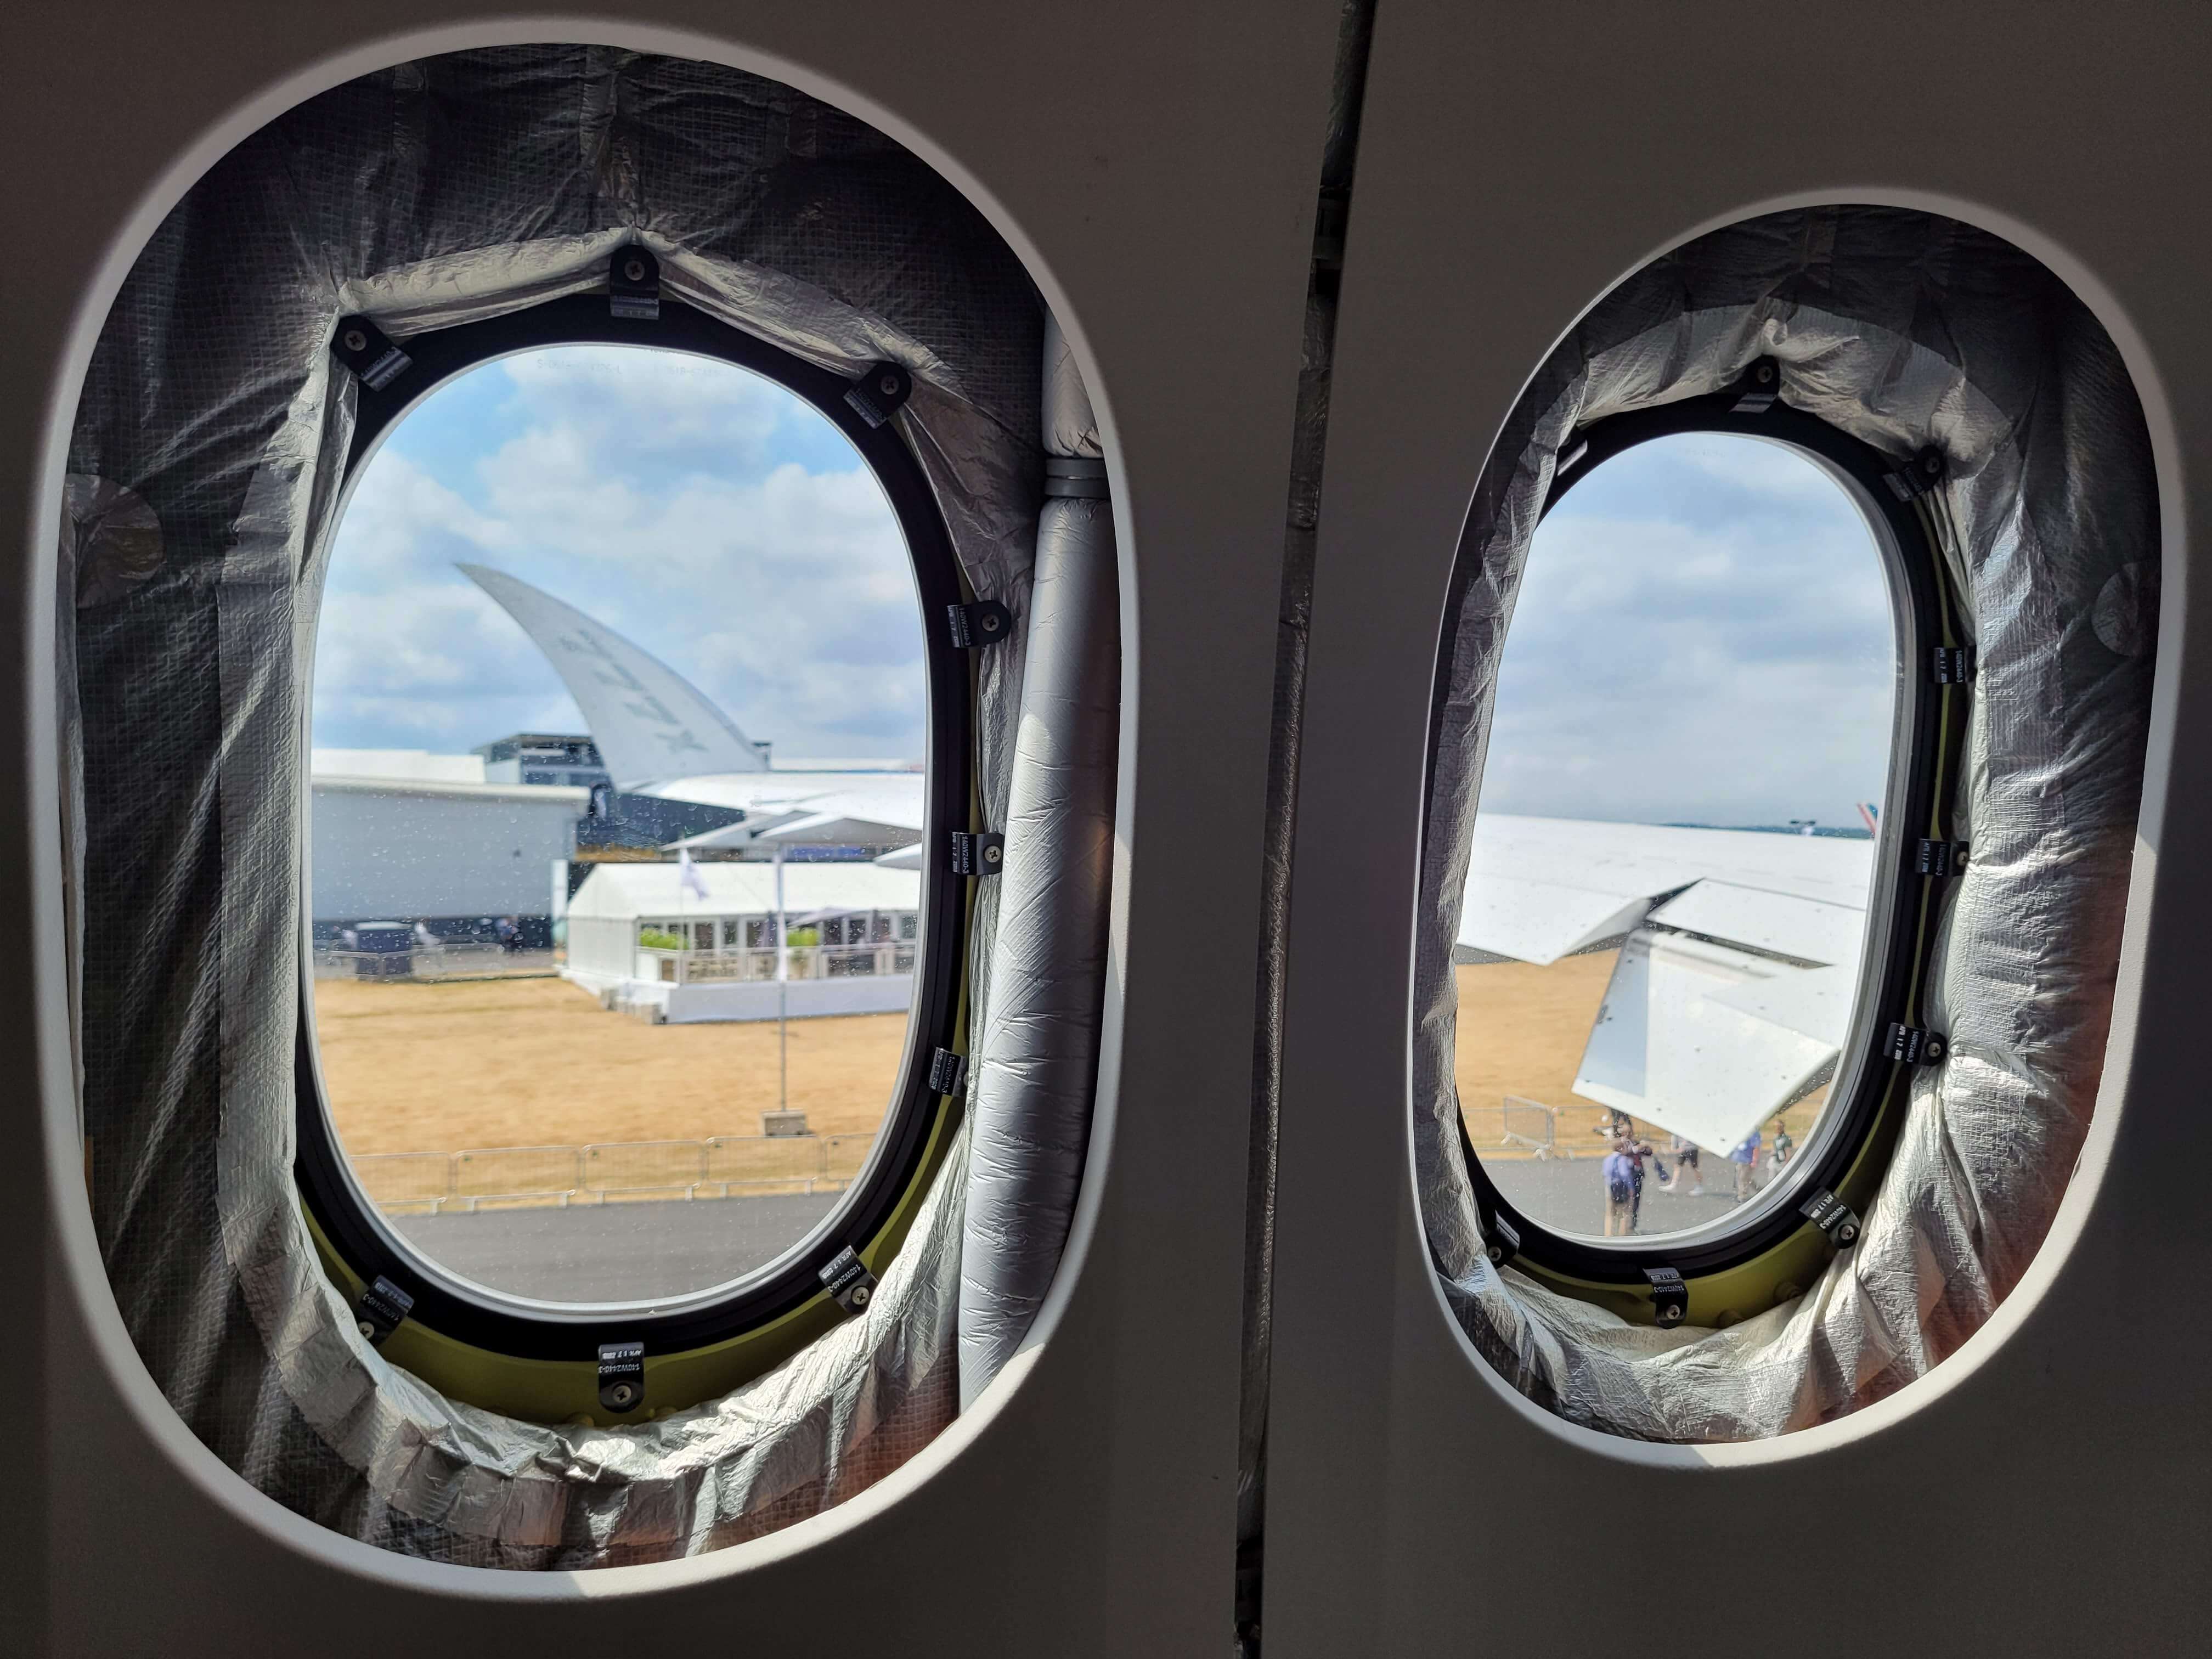 777X wingtip seen from inside the aircraft at farnborough